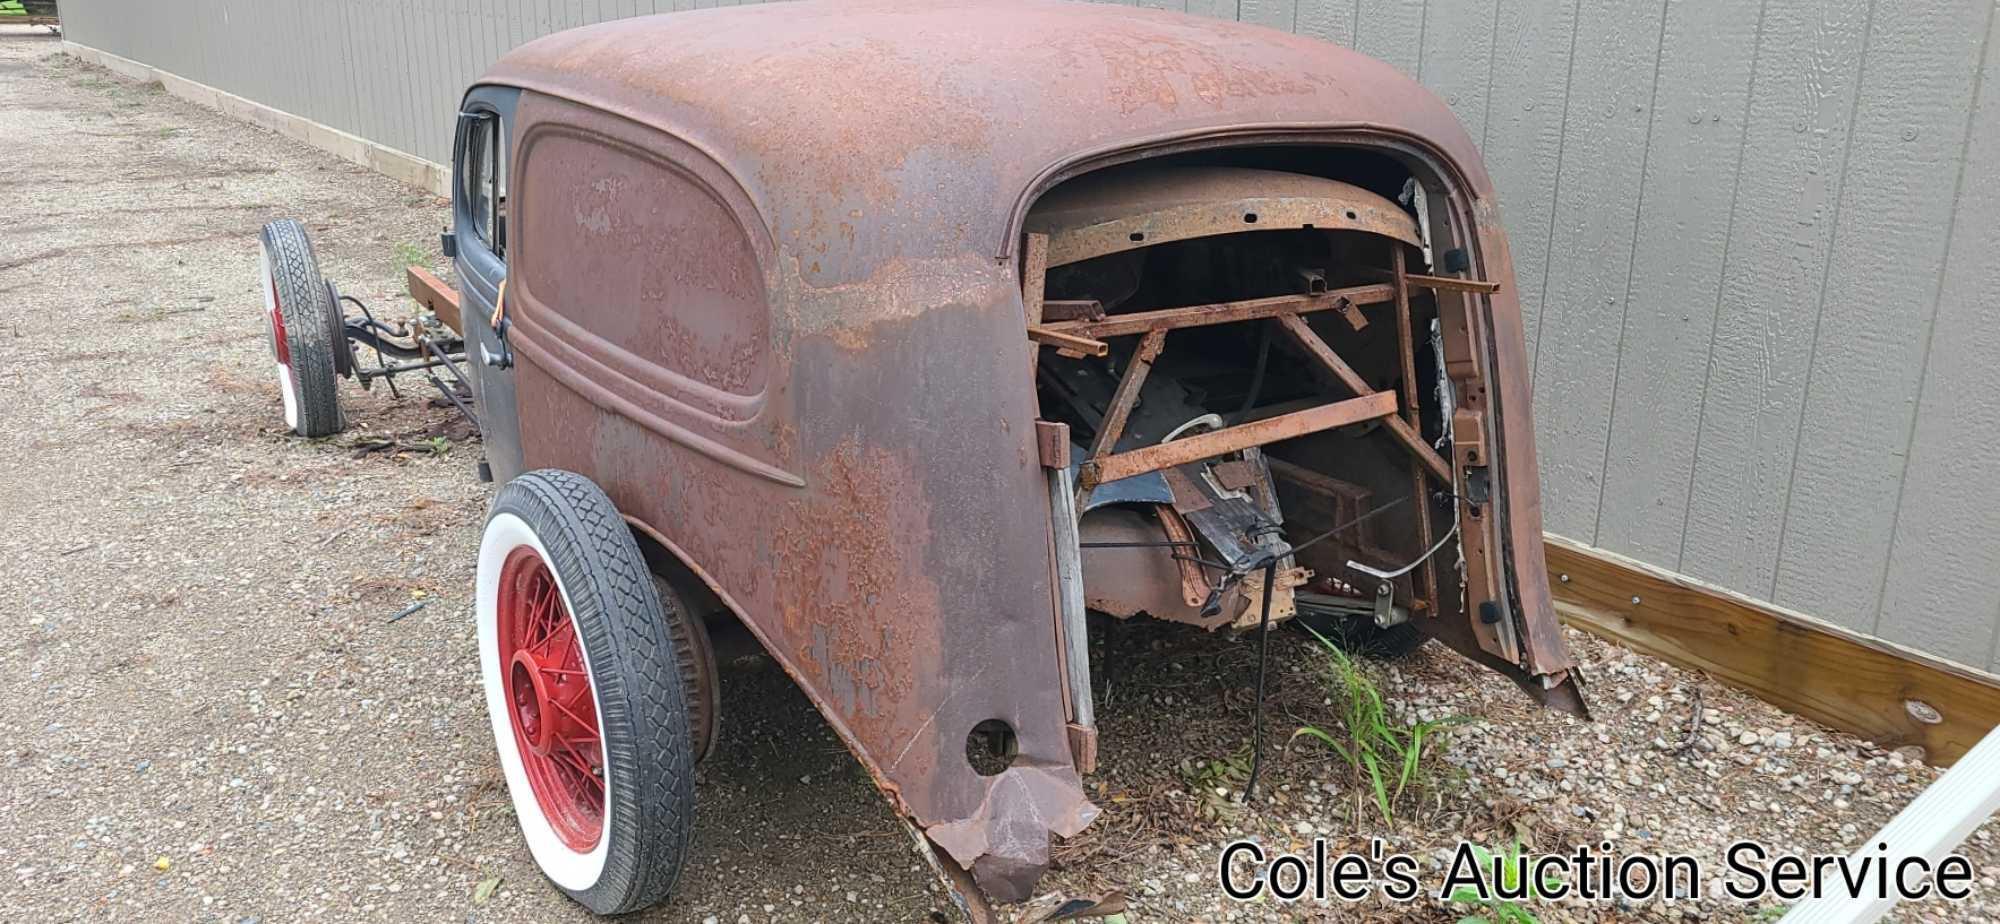 1932 custom rat rod project with a ton of parts.